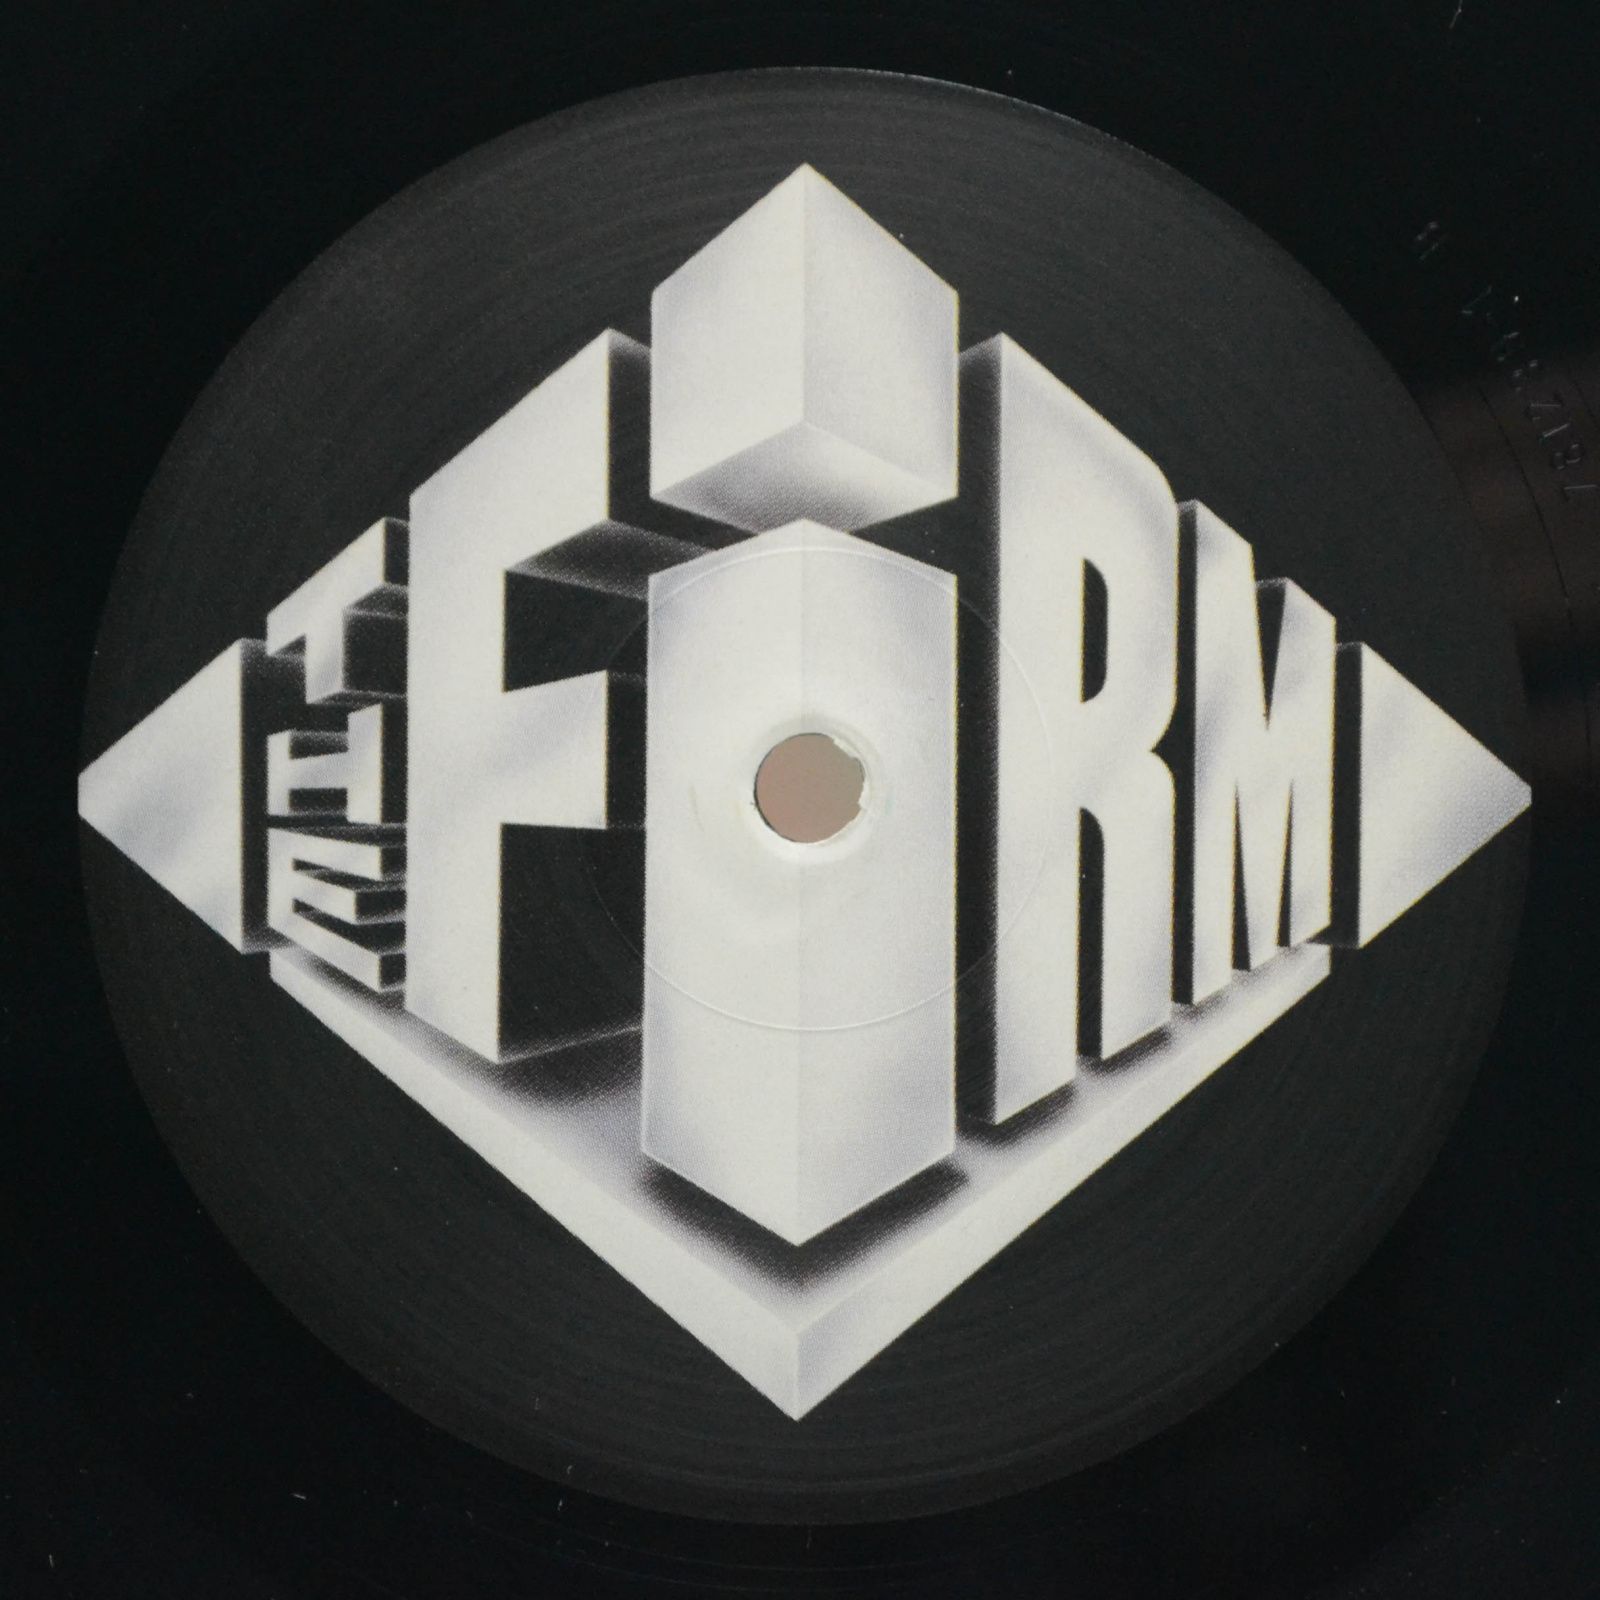 Firm — The Firm, 1985